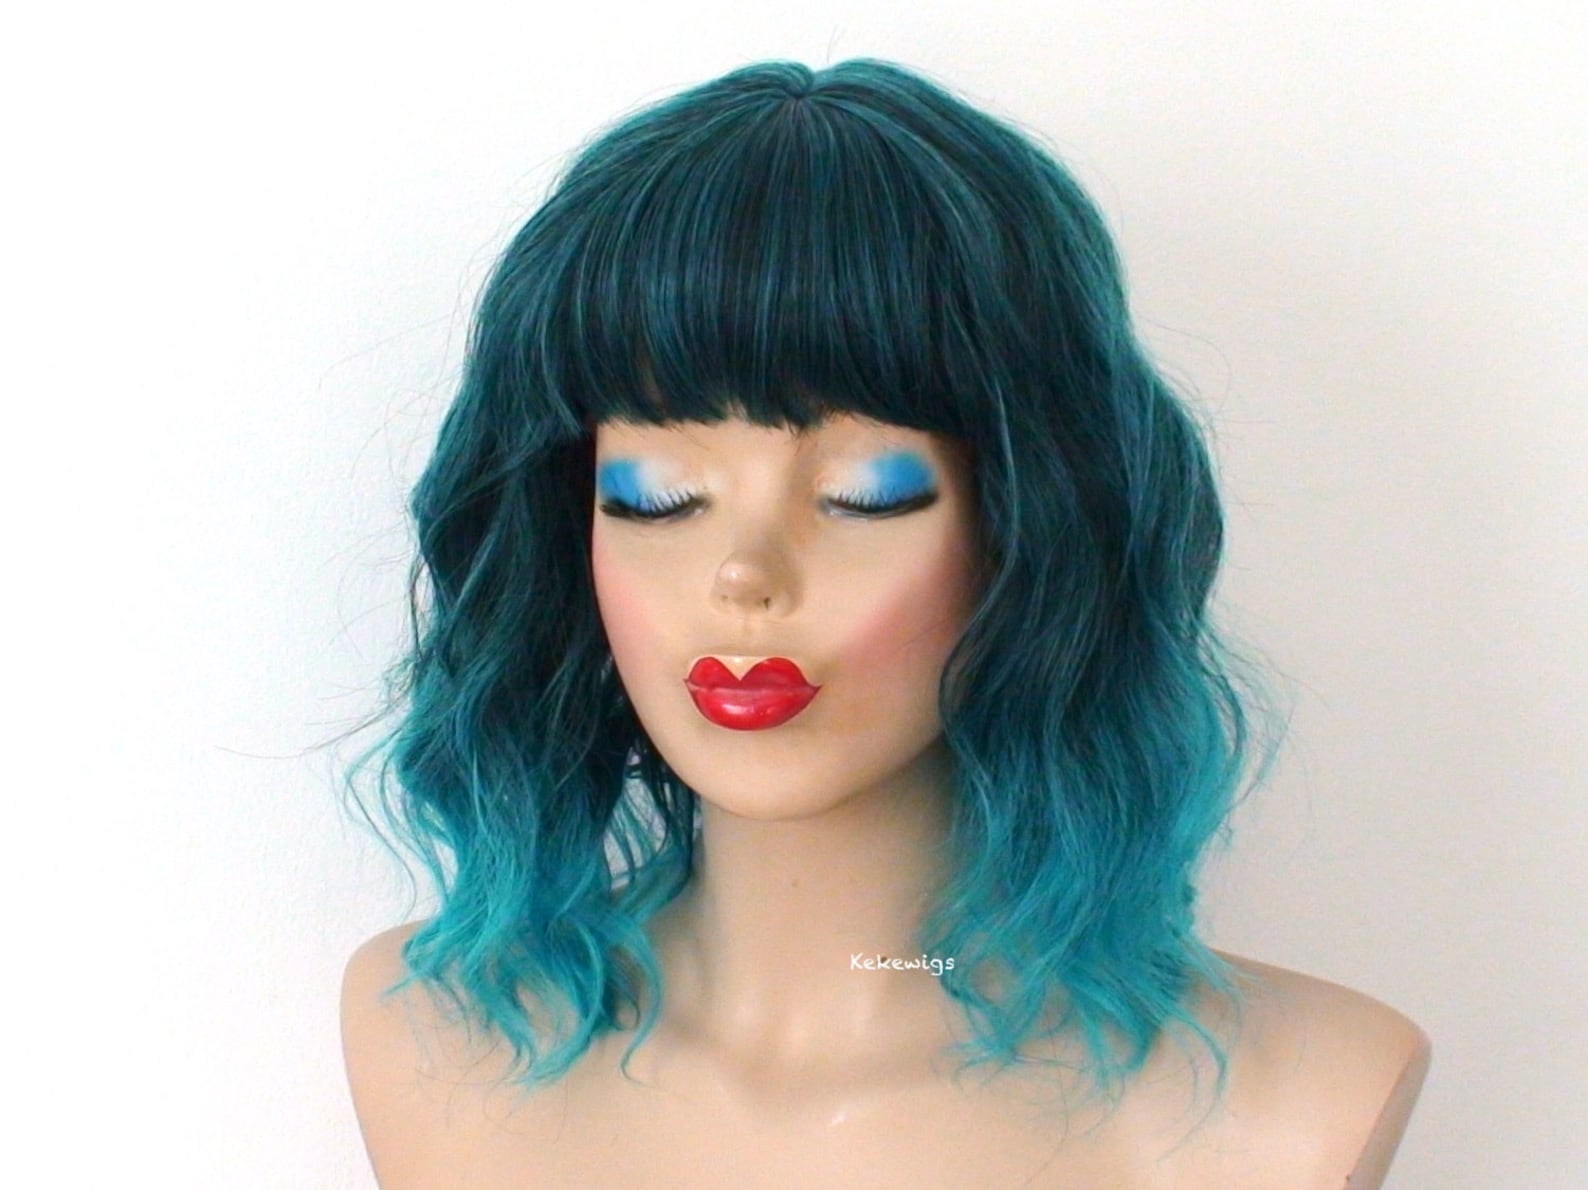 2. "Baby Blue Ombre Wig" - wide 6